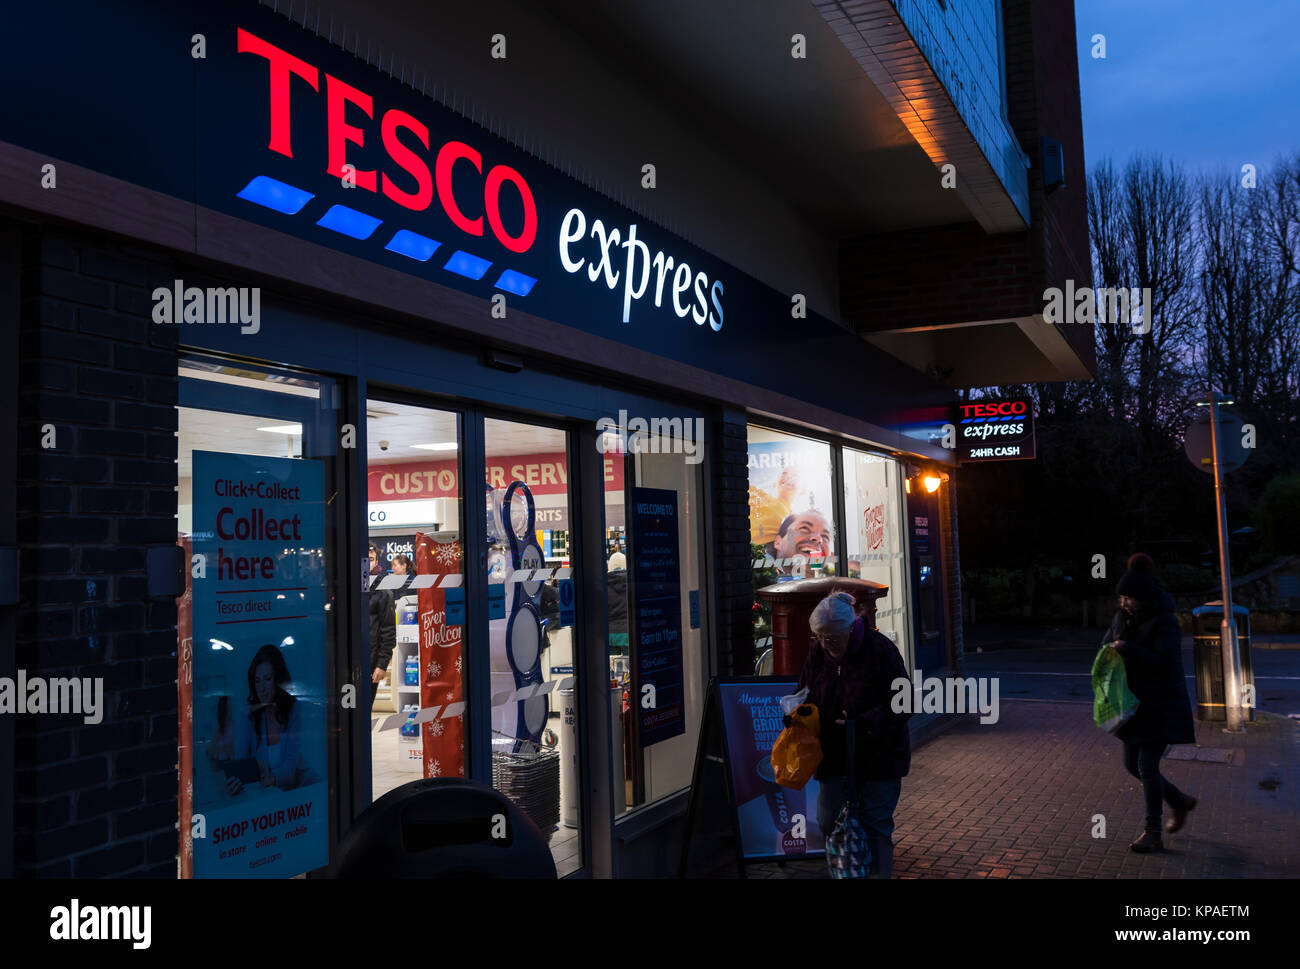 Tesco Express shop, a British grocery store, open in the evening in Winter in Rustington, West Sussex, England, UK. Stock Photo